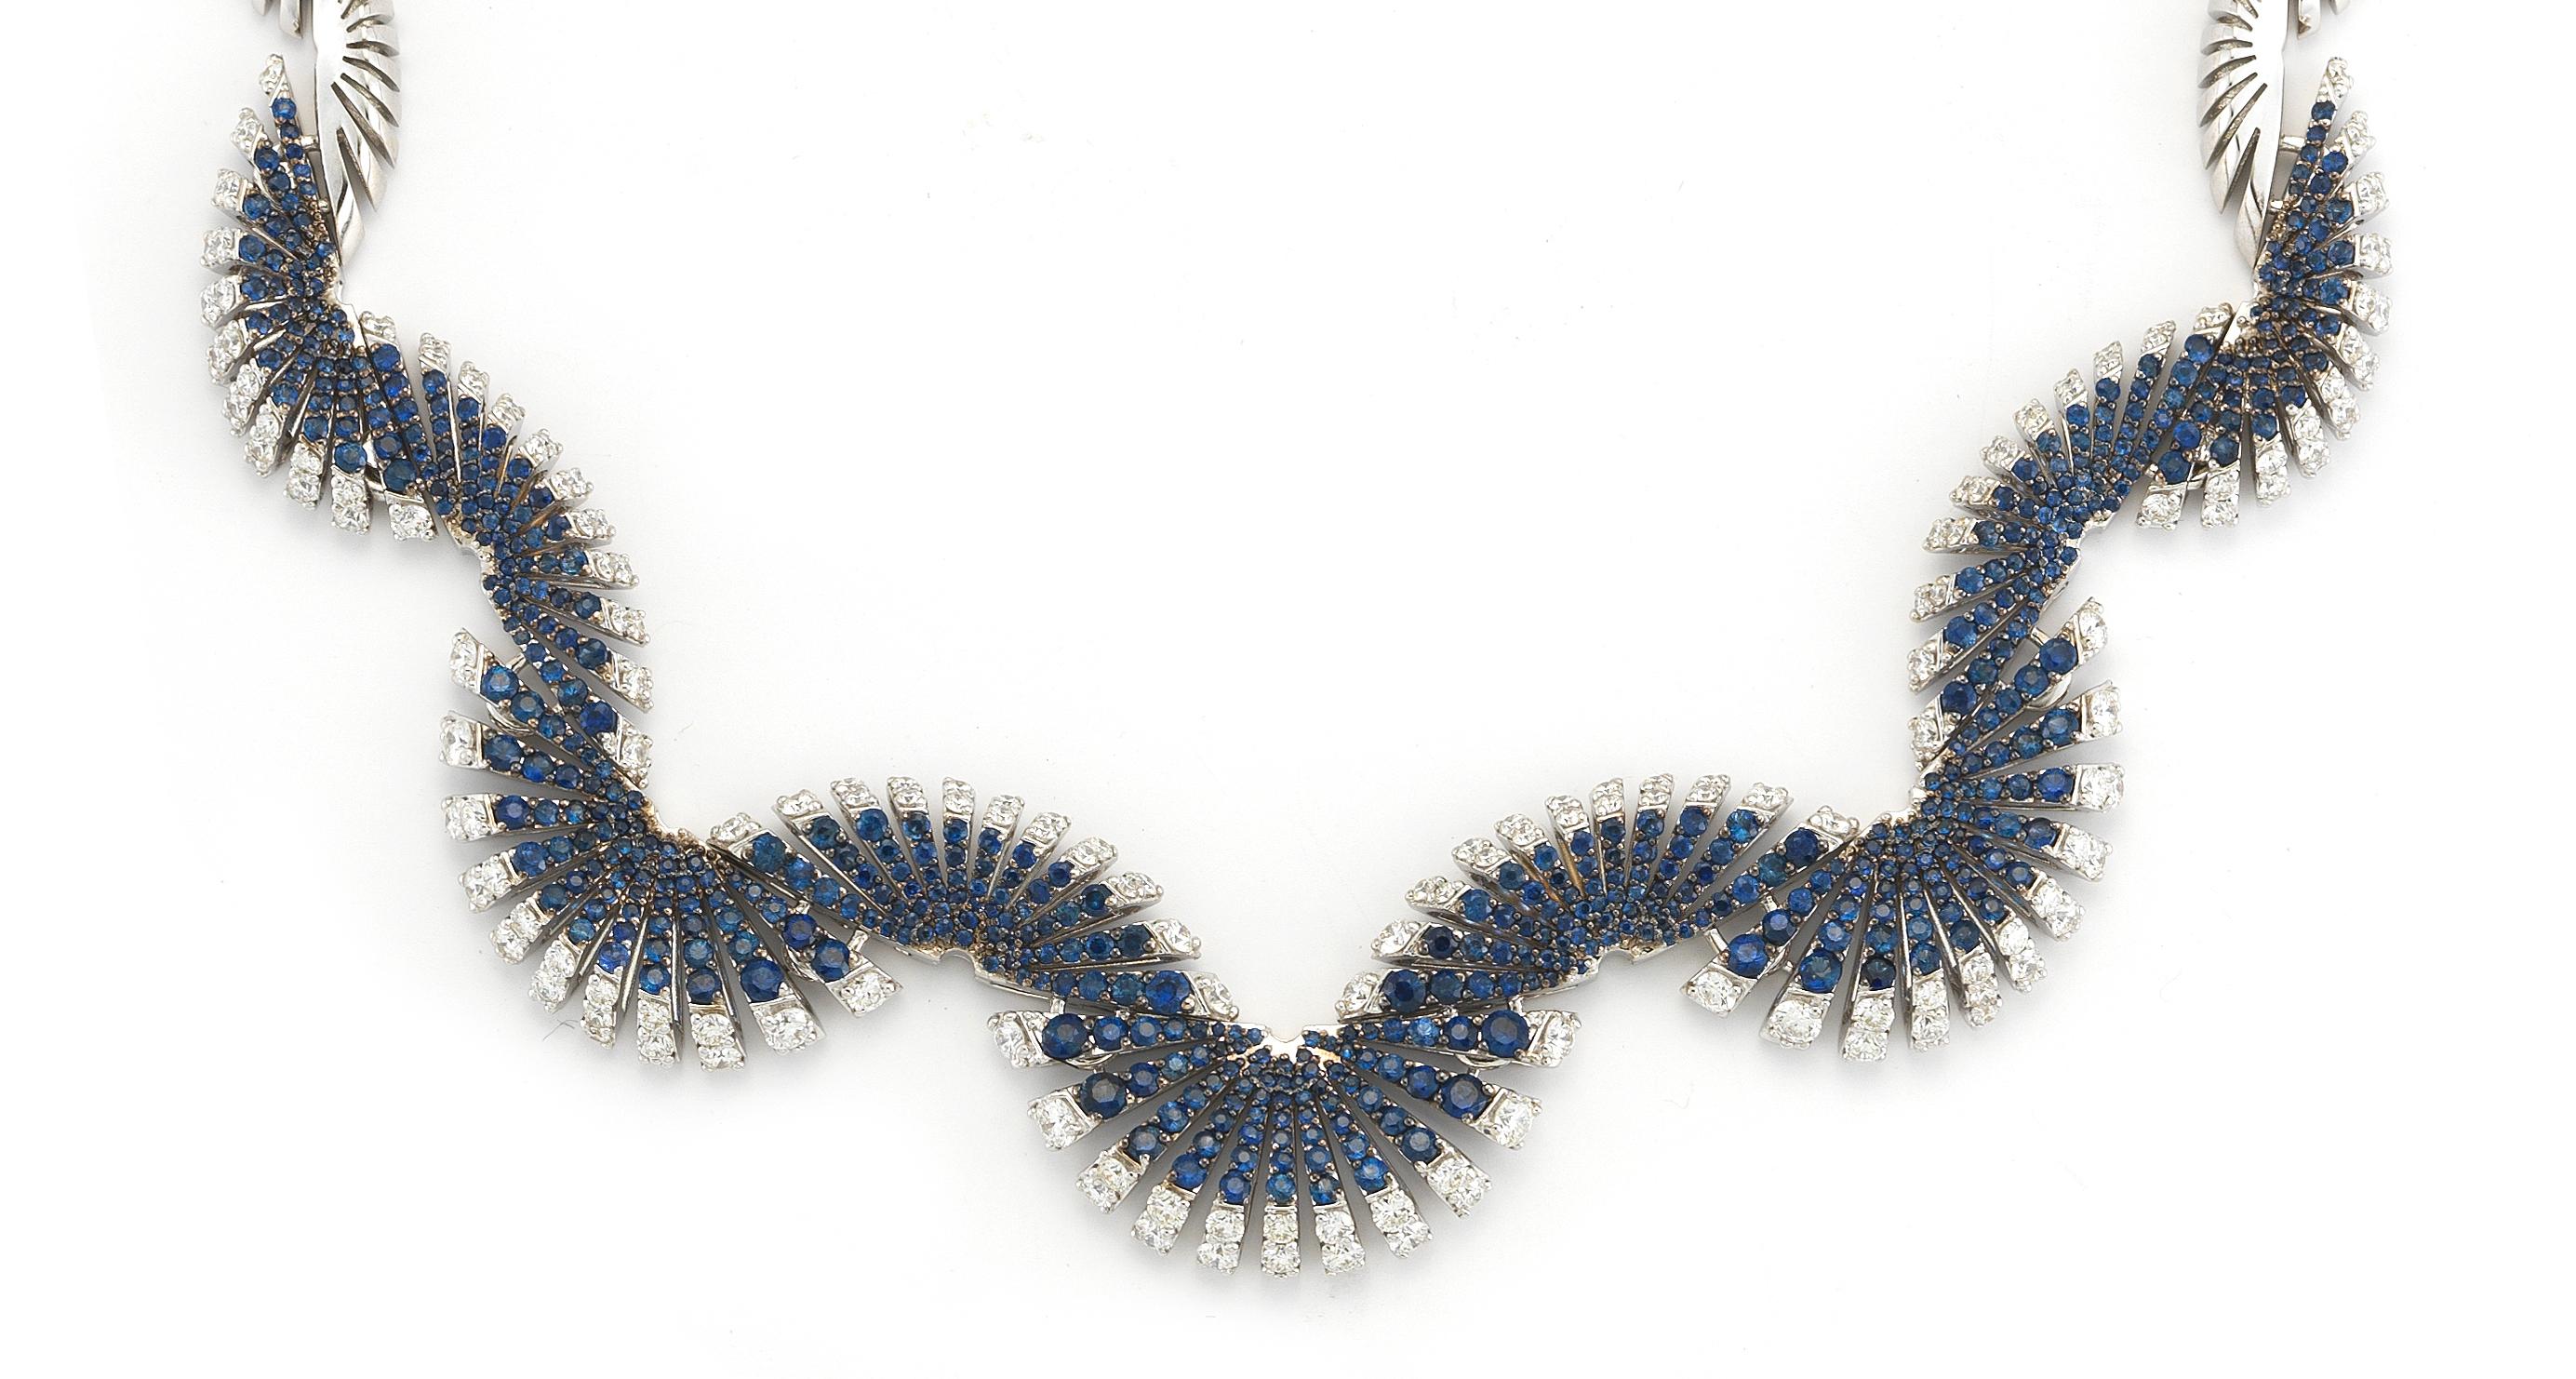 Raggi necklace in 18K white gold with white diamonds and blue sapphires
